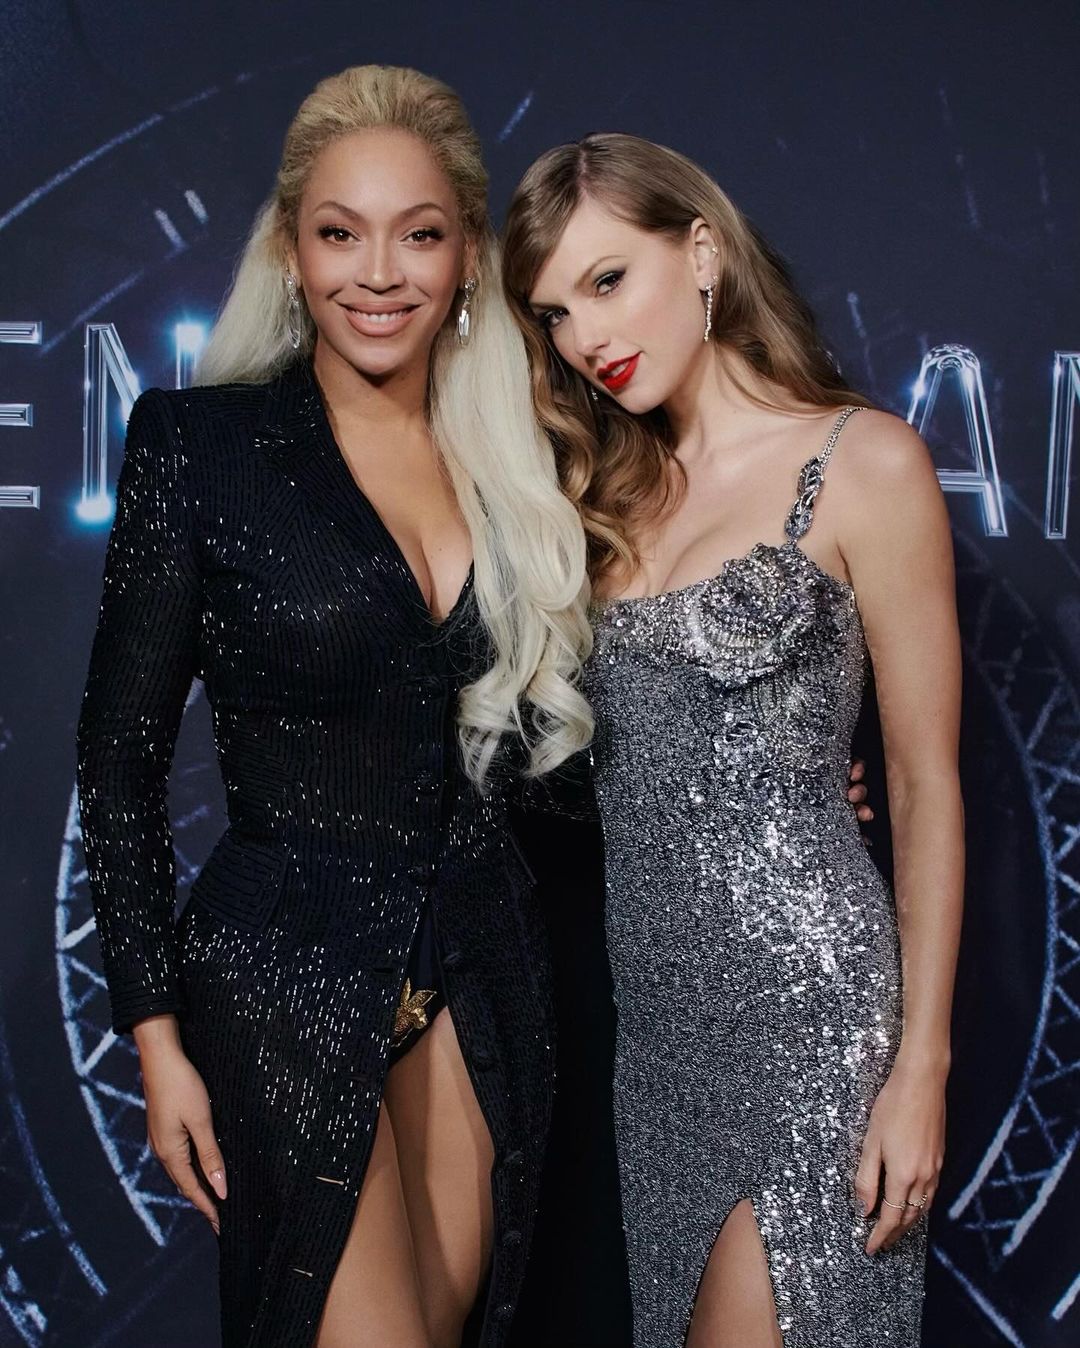 TAYLOR SWIFT AND BEYONCE